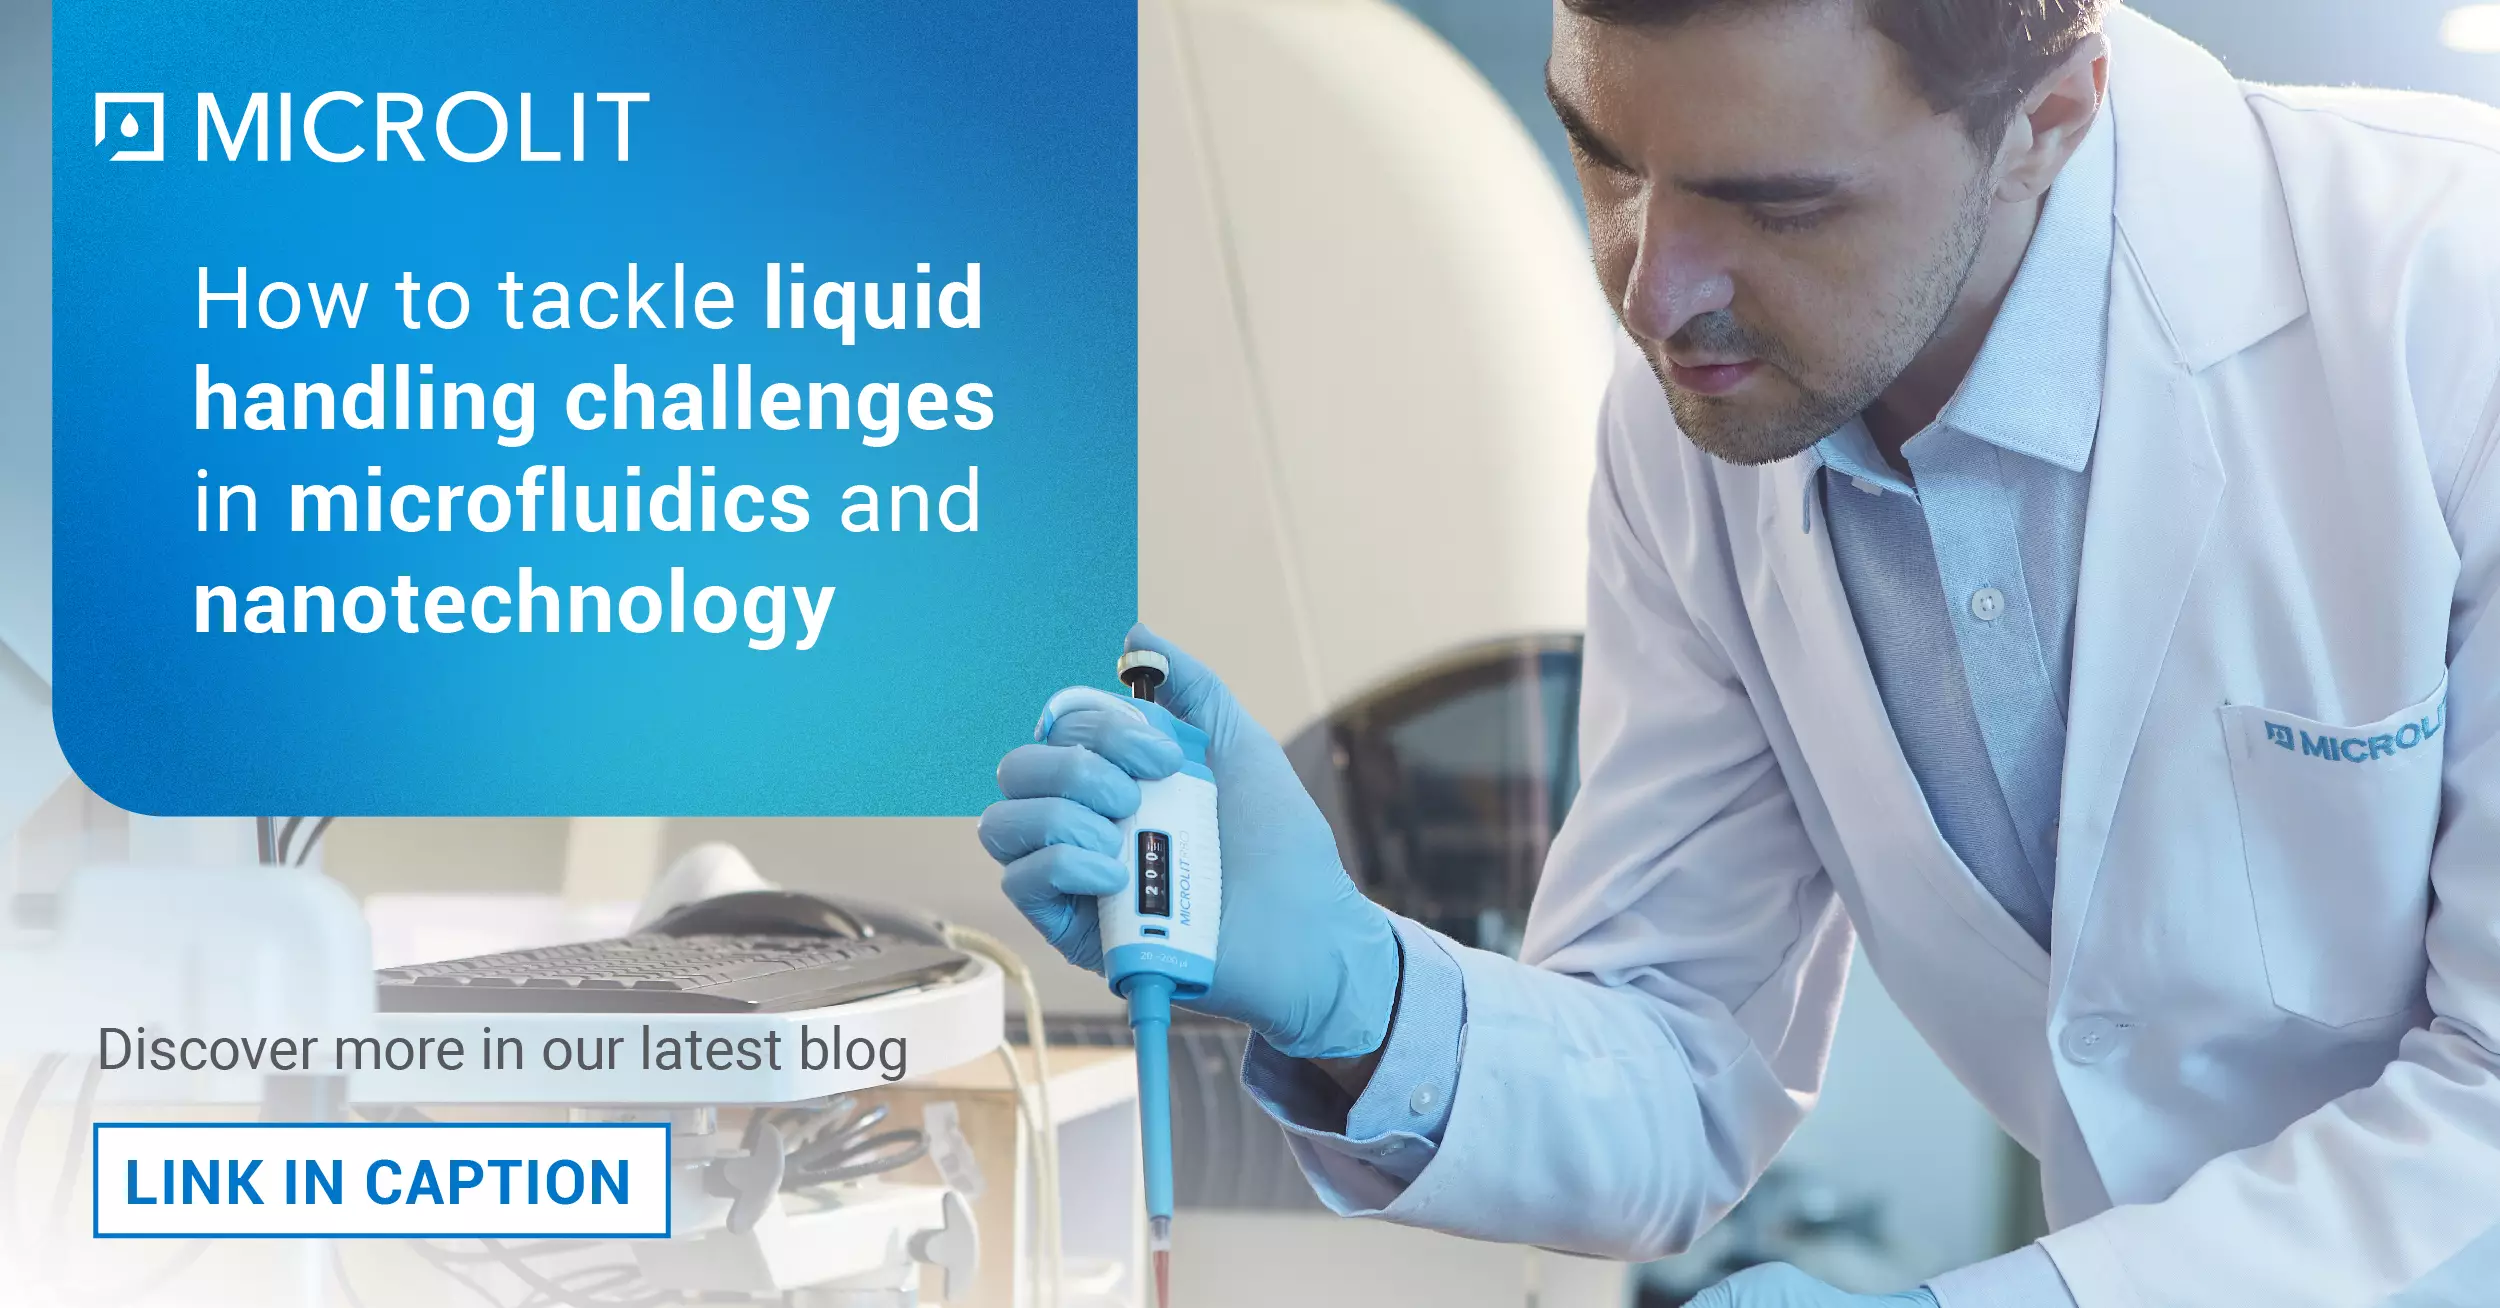 Addressing Liquid Handling Challenges in Microfluidics and Nanotechnology